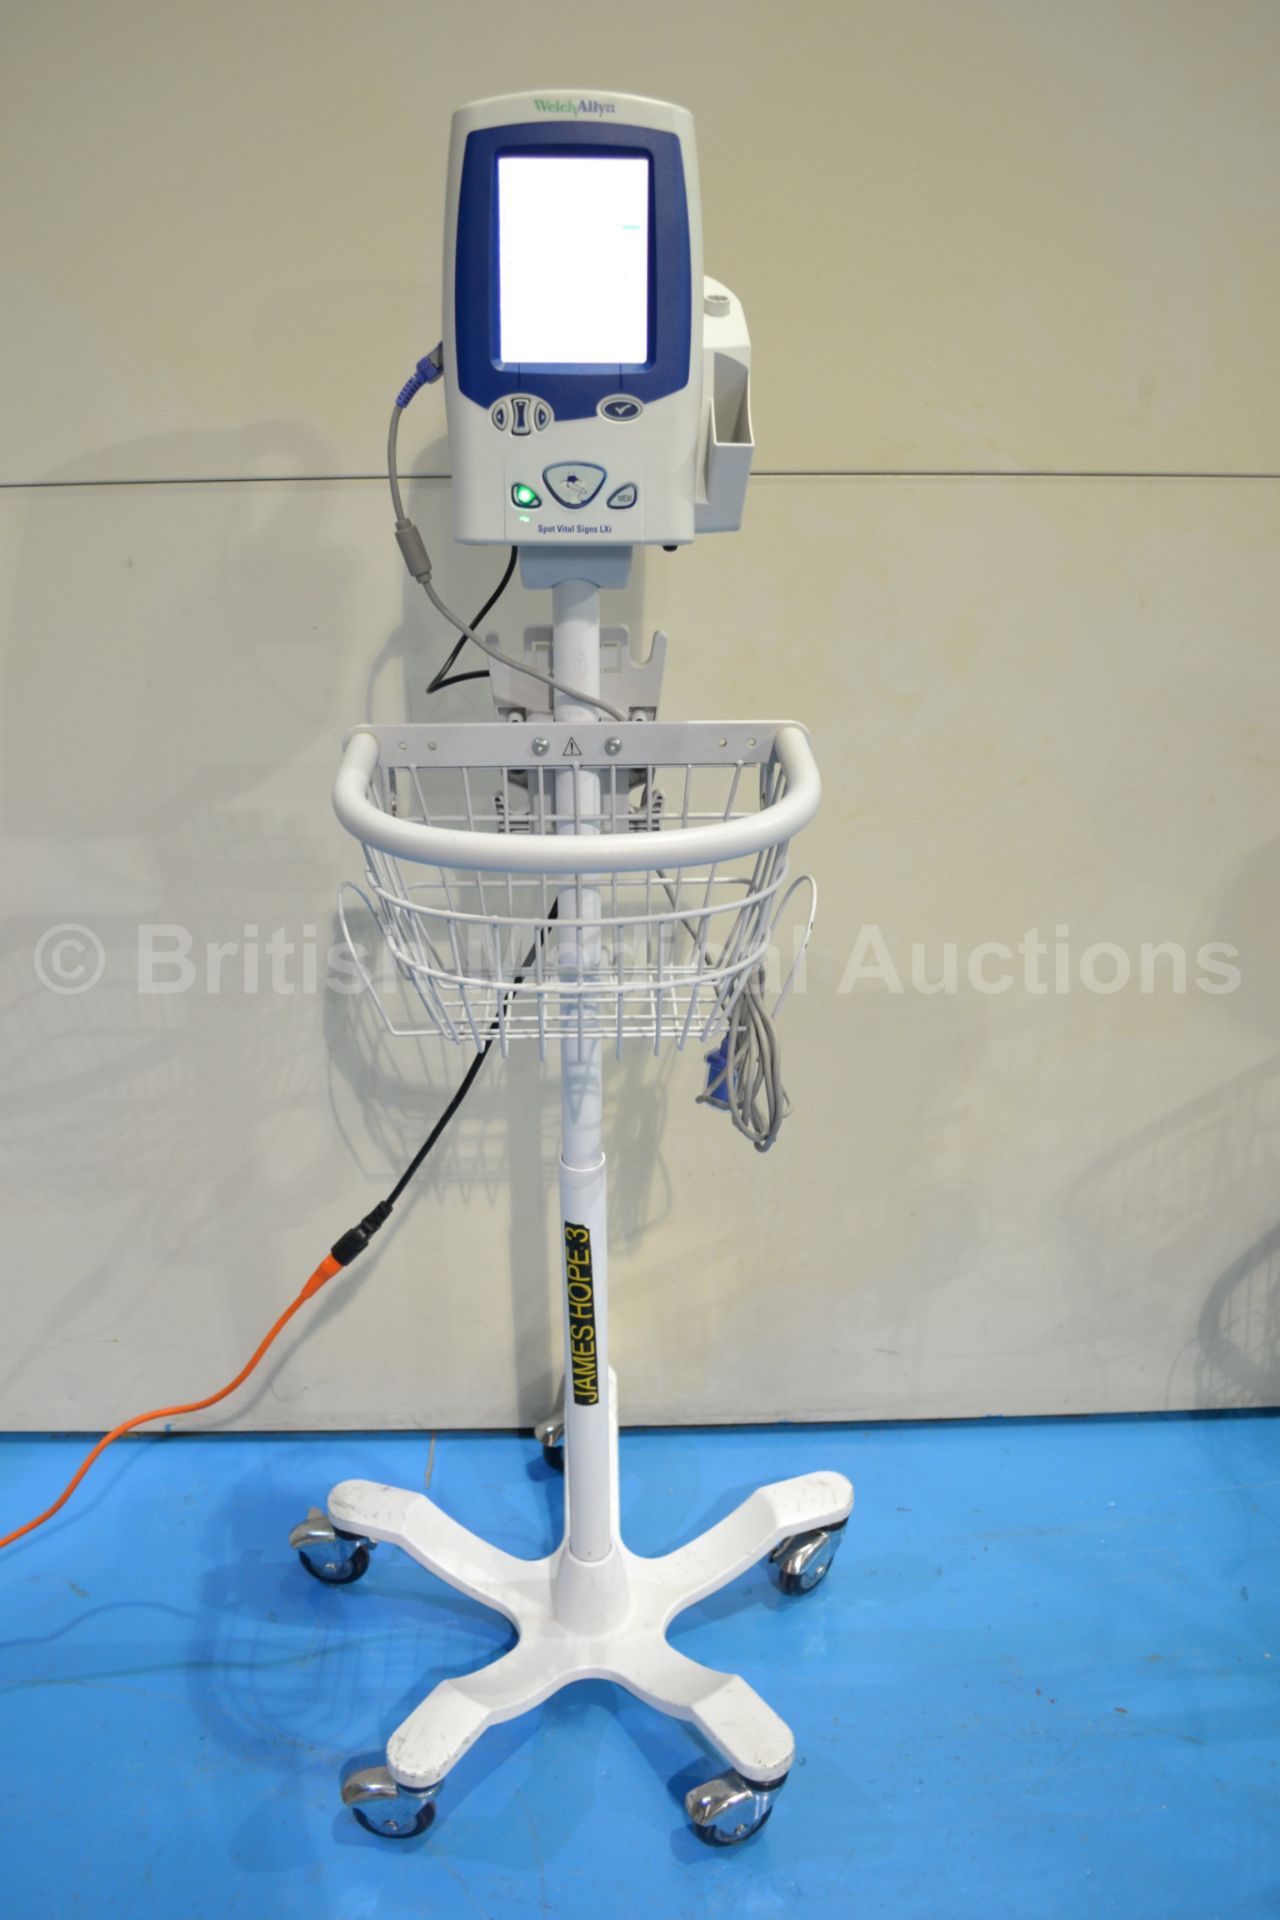 Welch Allyn Spot Vital Signs Monitor LXi on Stand - Image 2 of 2